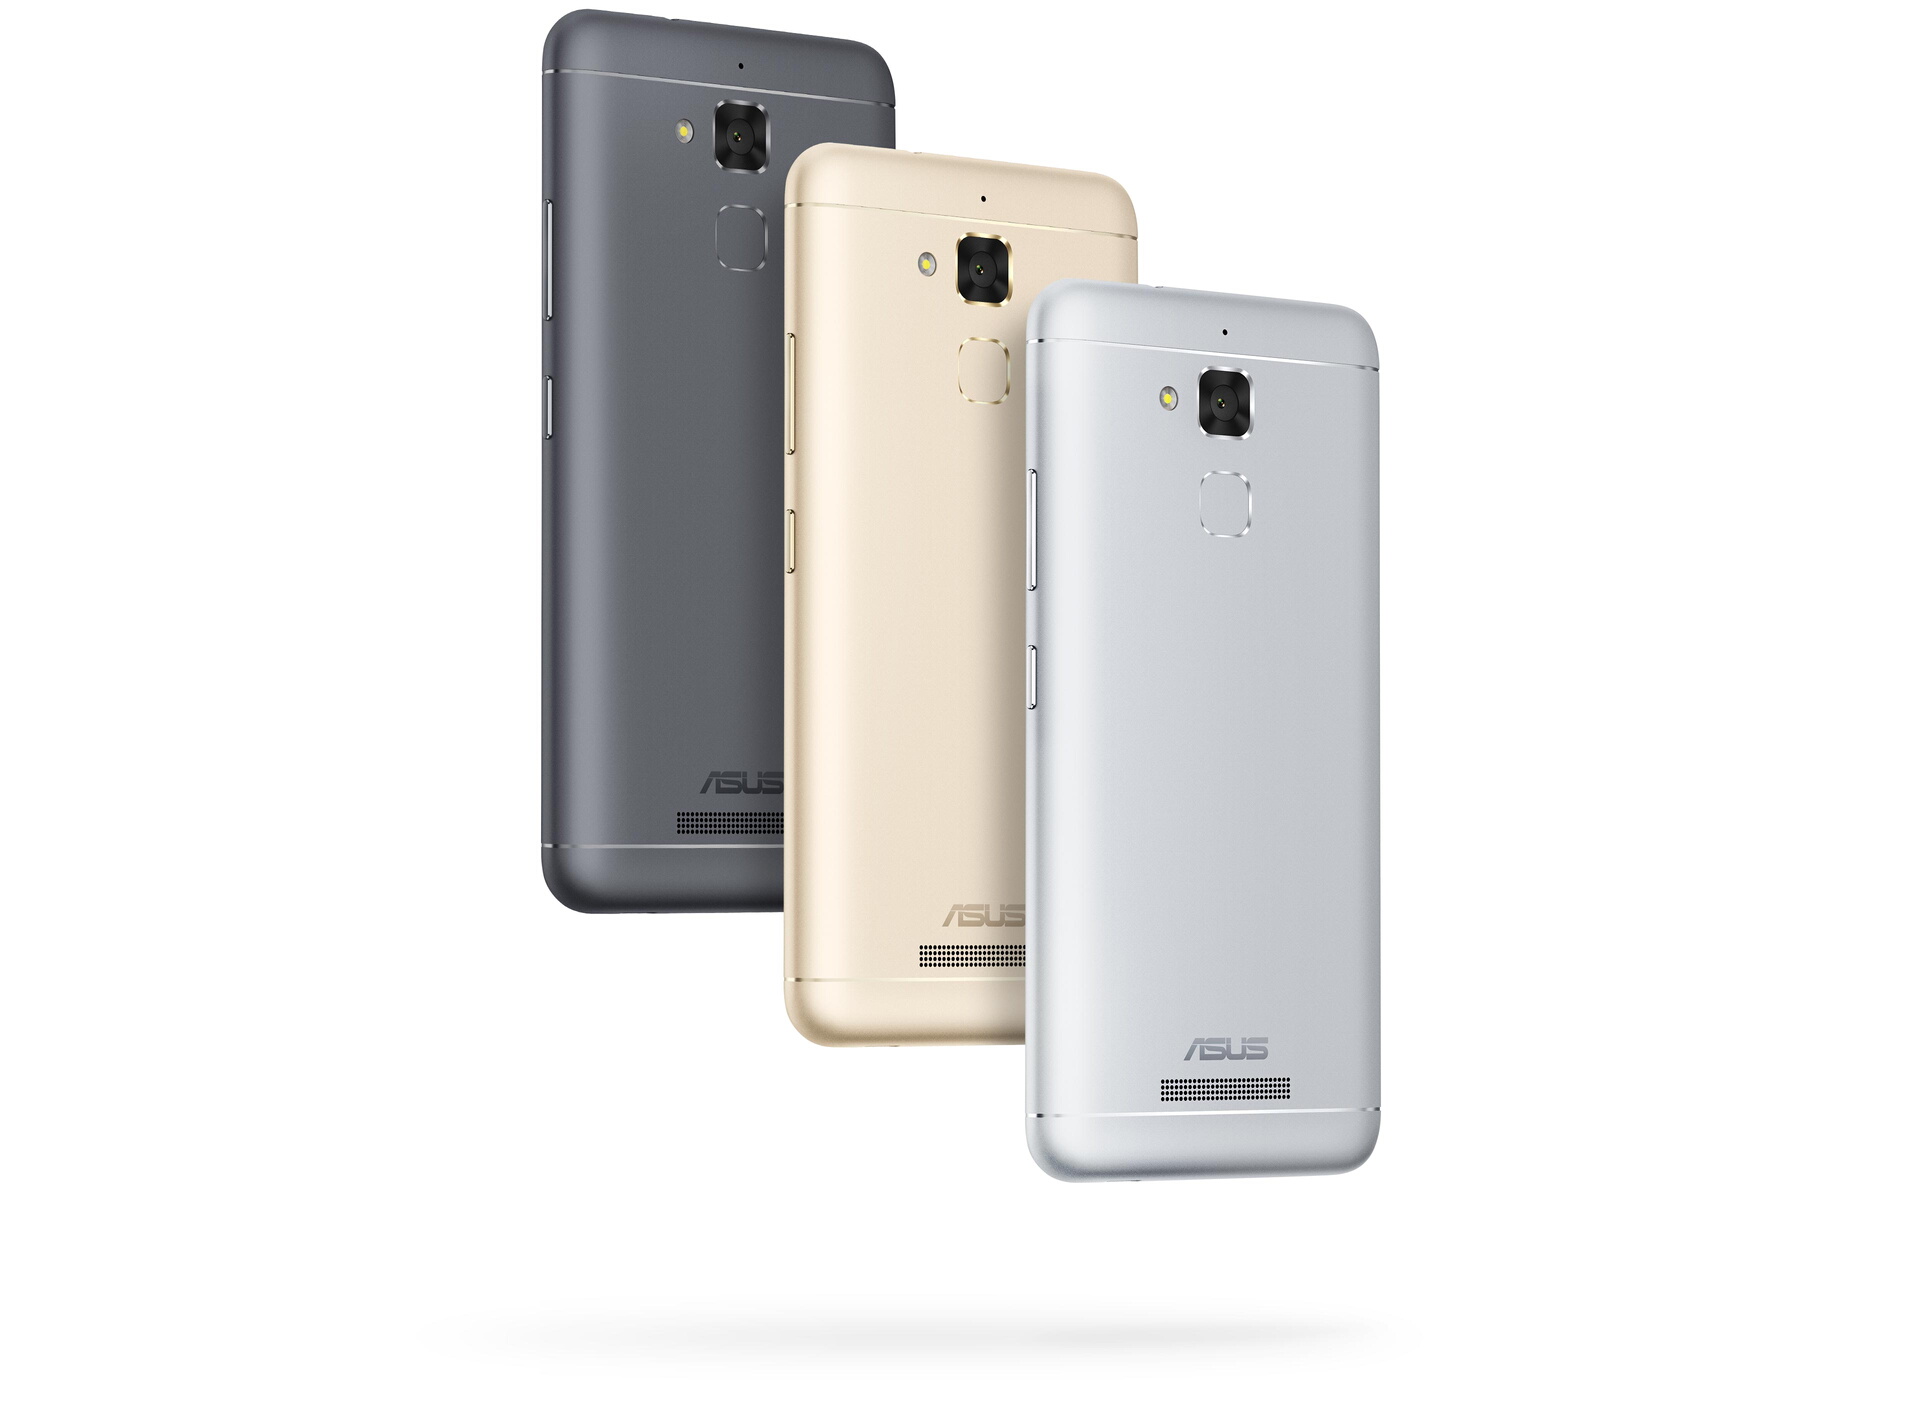 “Colors Match your unique style ZenFone 3 Max is premium design in every detail, and it’s yours to desire in three gorgeous colors: Sand Gold, Titanium Gray and Glacier Silver.”???????